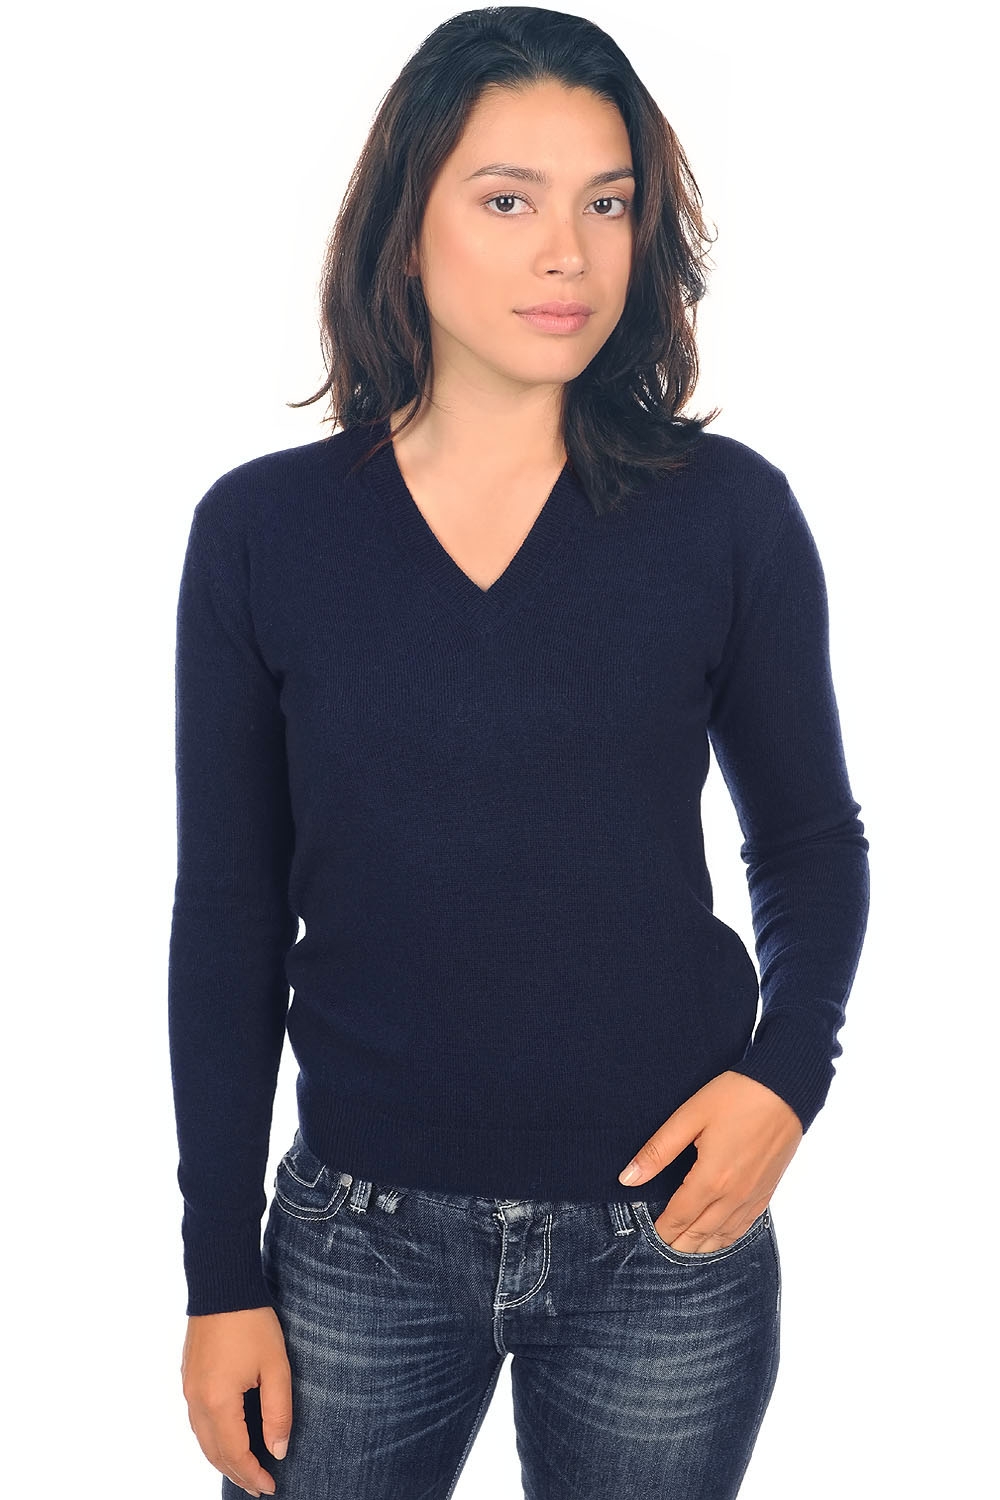 Cashmere ladies basic sweaters at low prices tessa first dress blue s